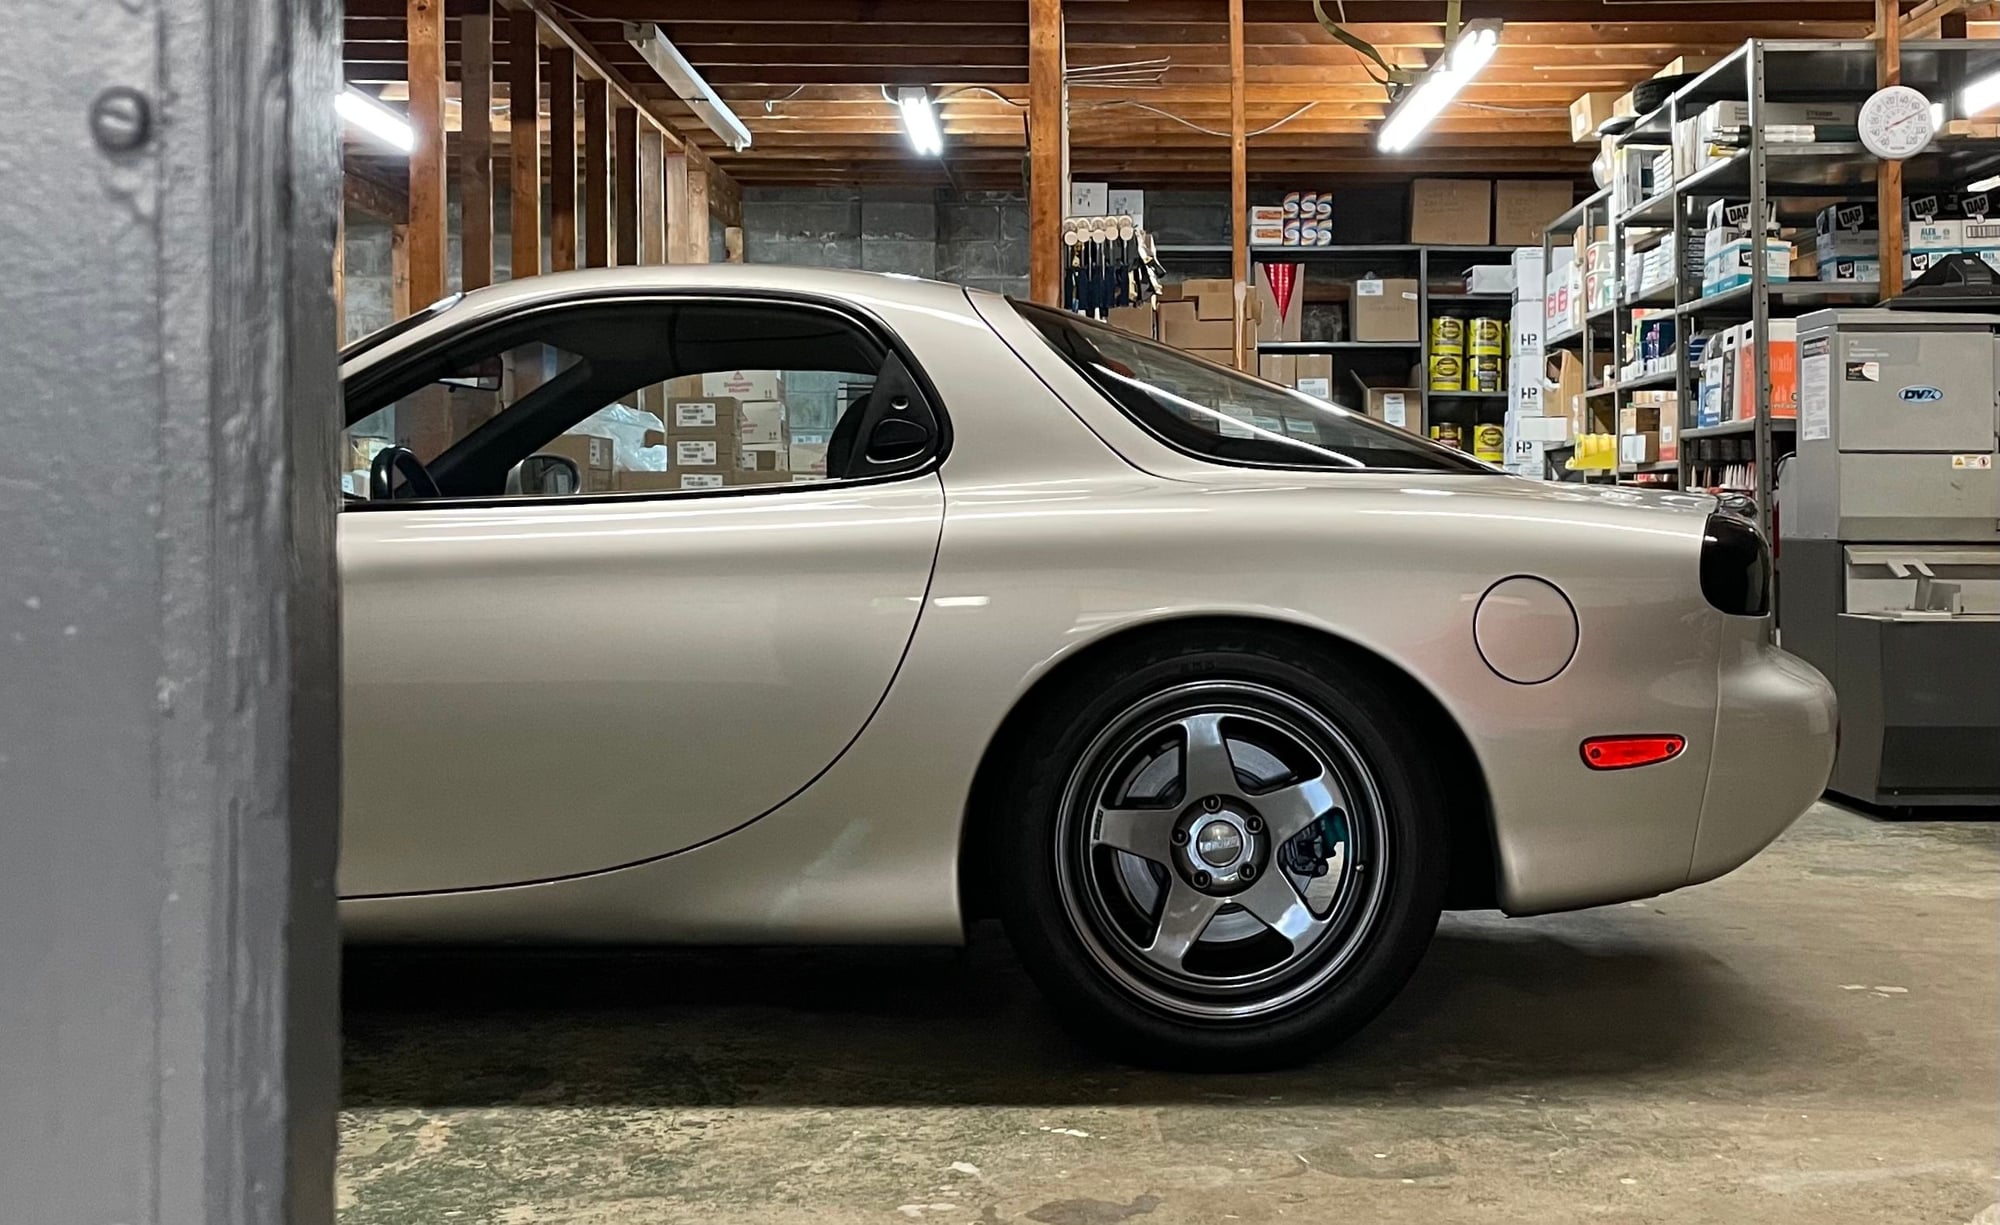 1994 Mazda RX-7 - 94' Silver FD Slick top - Used - VIN JM1FD3337R0302100 - 101,000 Miles - Manual - Coupe - Silver - N. Scituate, RI 02857, United States